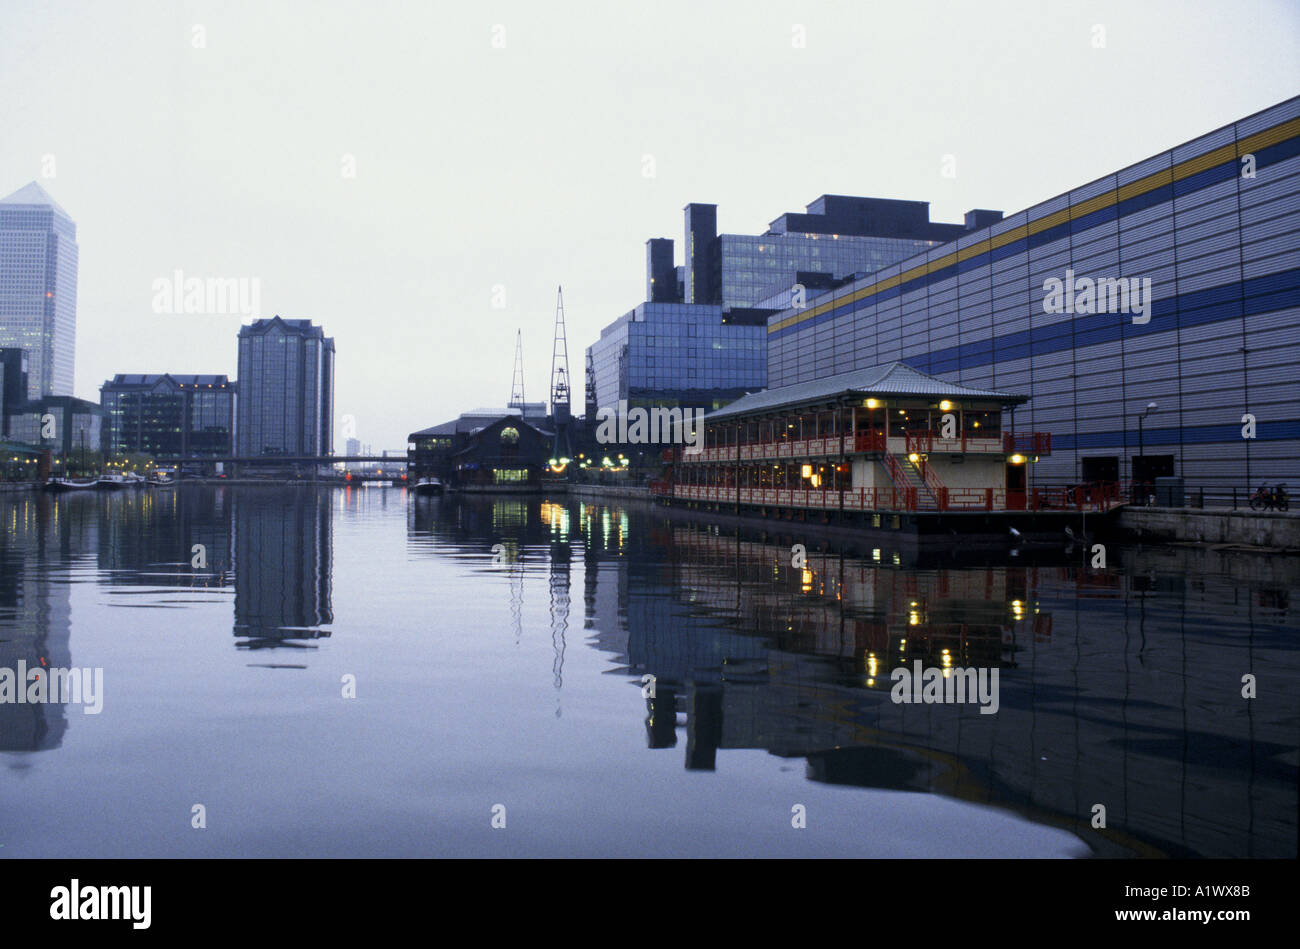 FLOATING CHINESE RESTAURANT LONDON DOCKLANDS Stock Photo